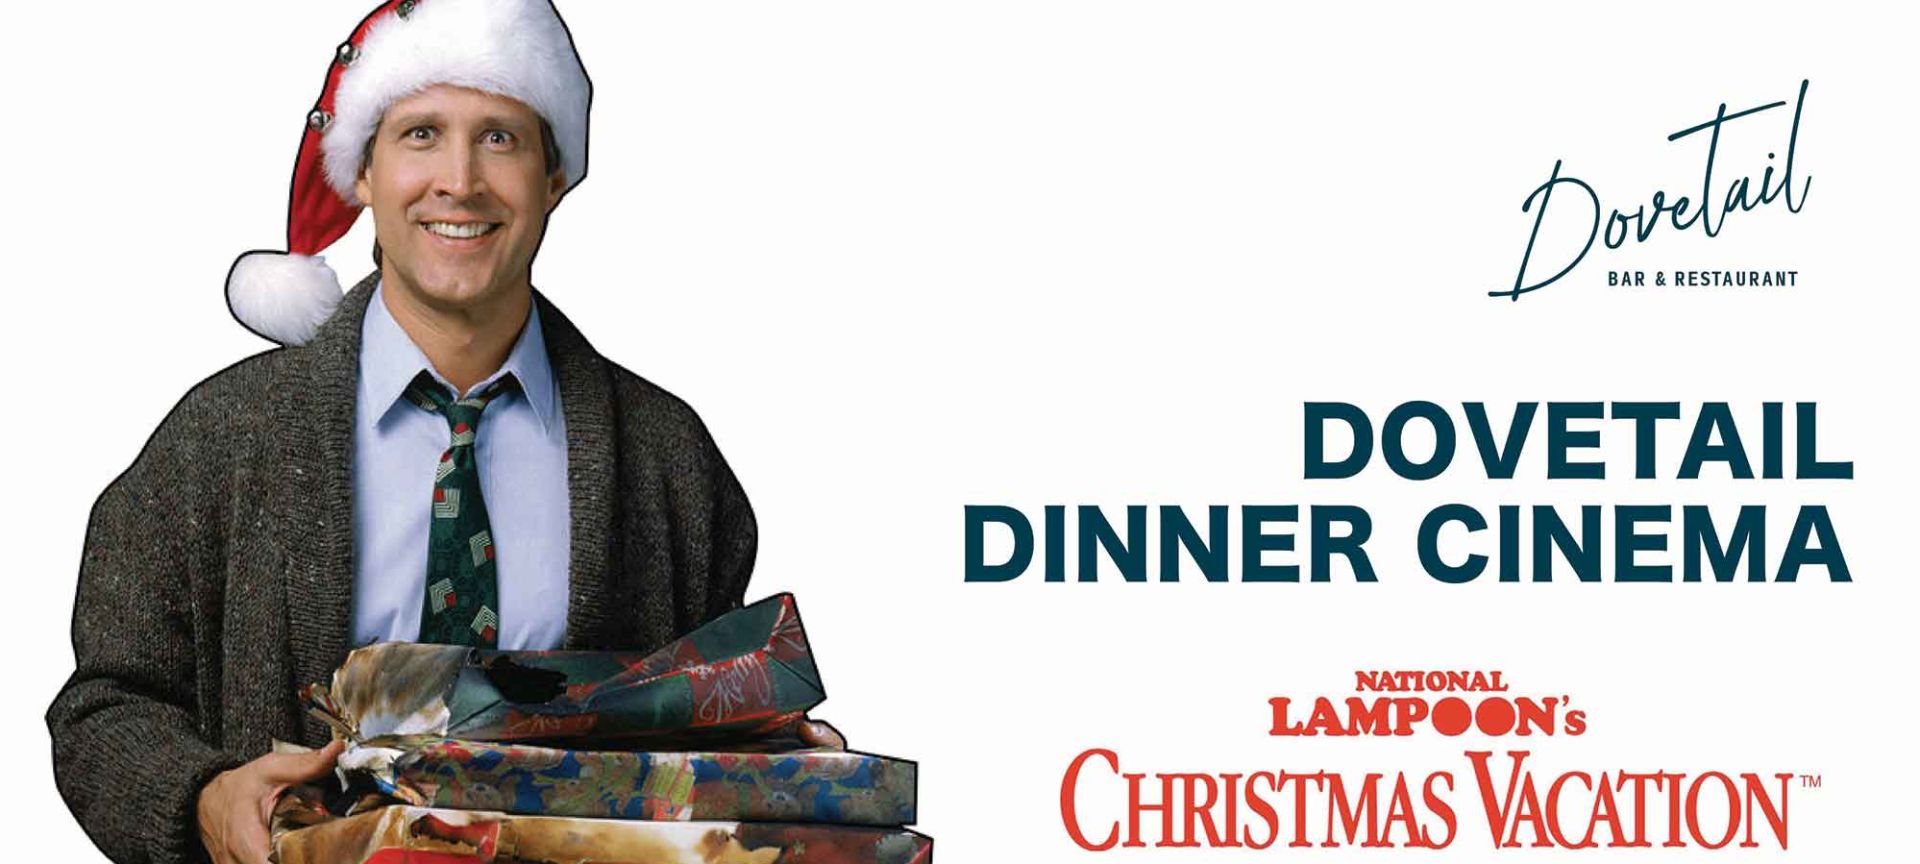 Dovetail Dinner Cinema Featuring National Lampoon's Christmas Vacation